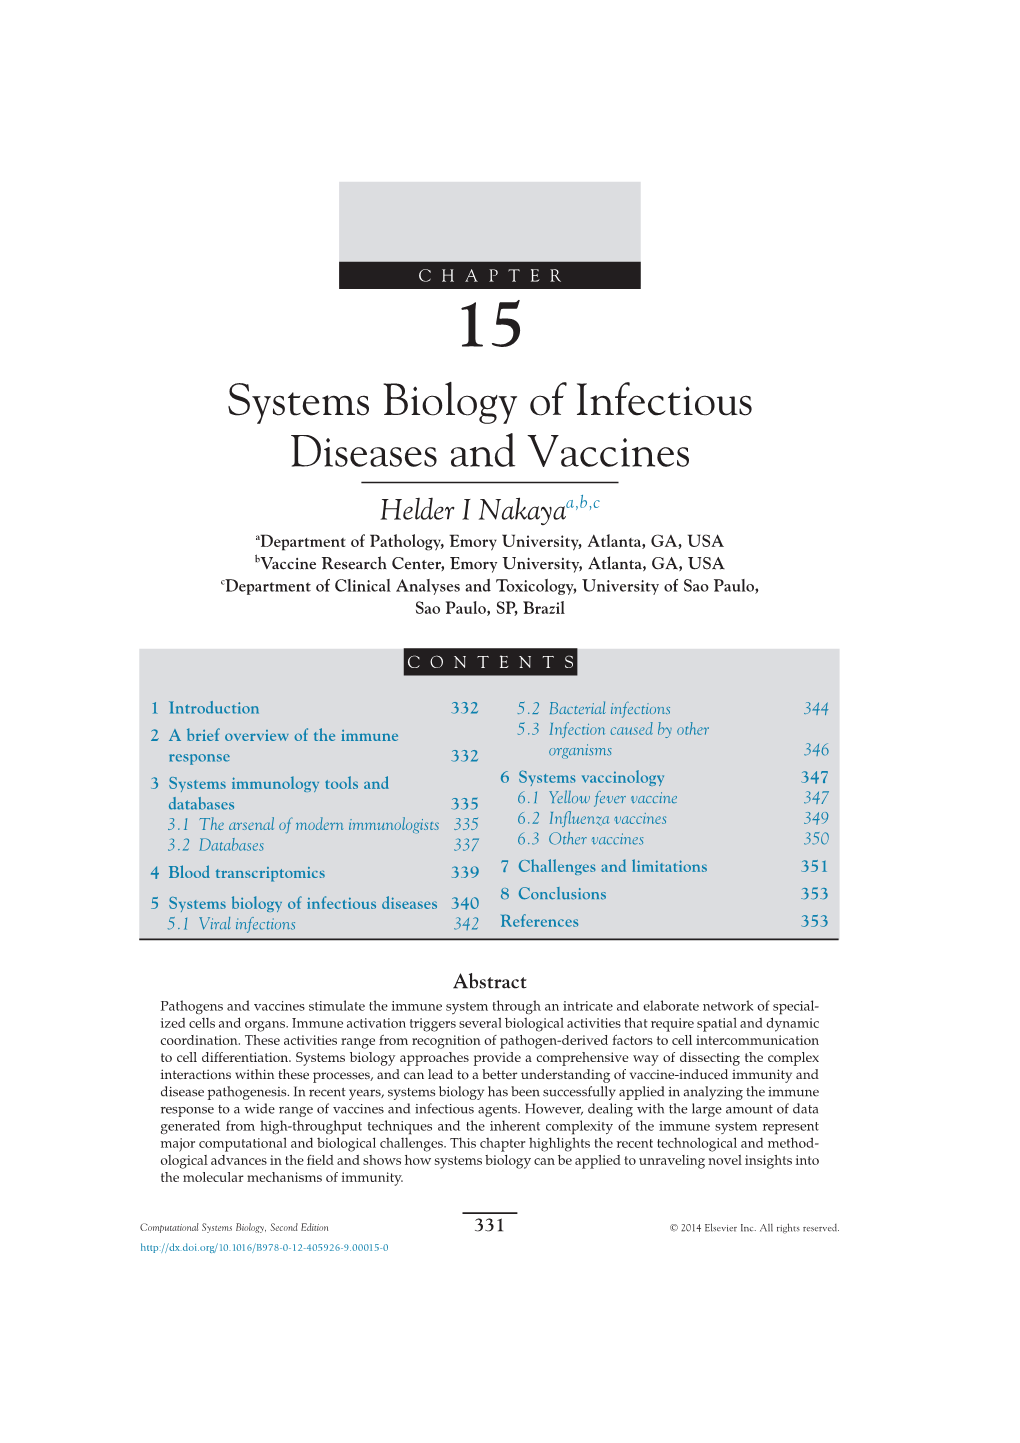 Systems Biology of Infectious Diseases and Vaccines